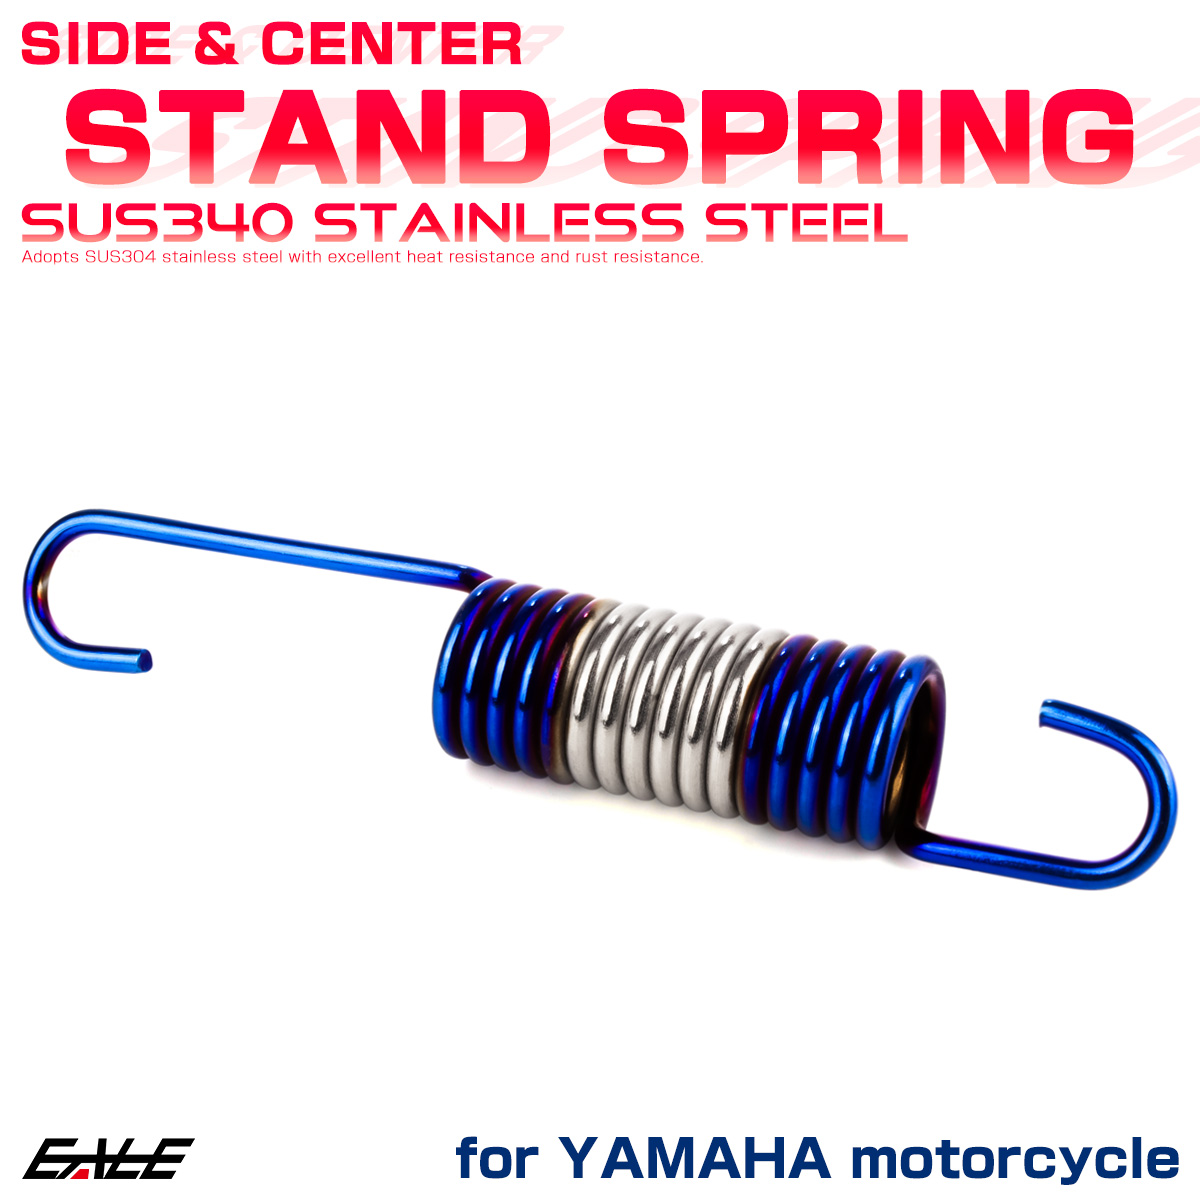  side center stand springs 105mm Yamaha car bike SUS304 stainless steel silver & roasting titanium color TE0025